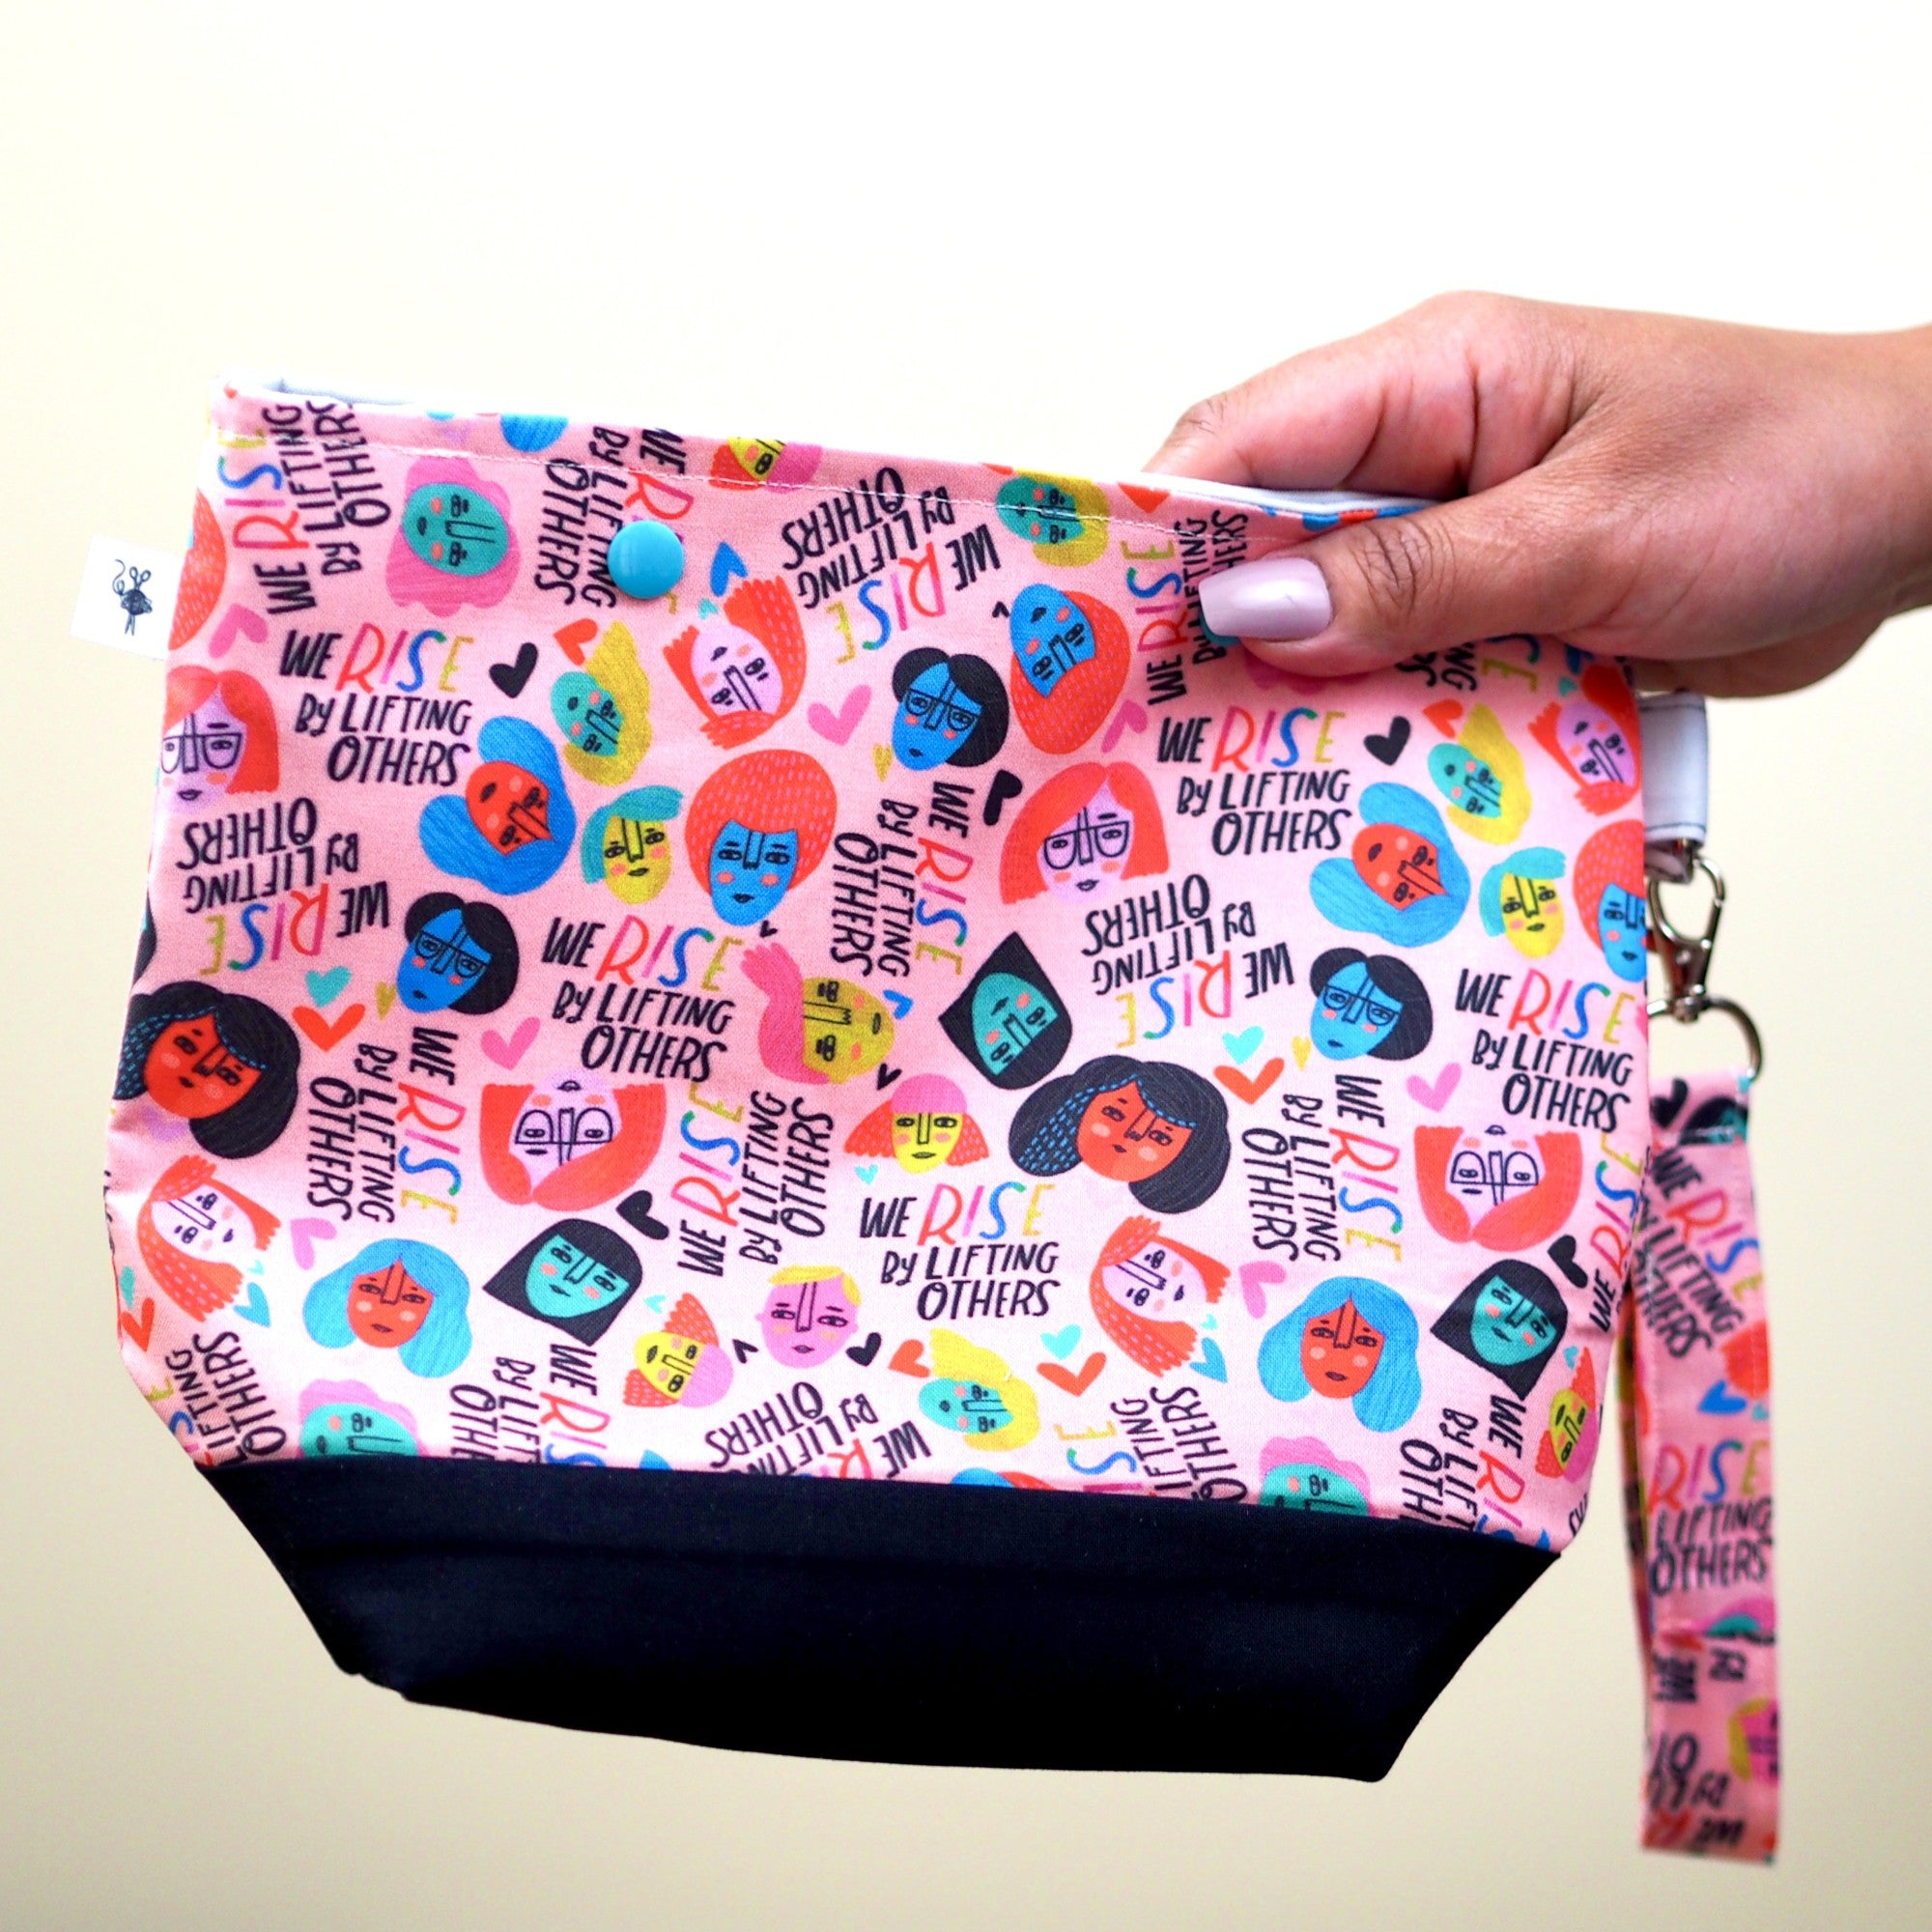 We rise by lifting others snap project pouch.